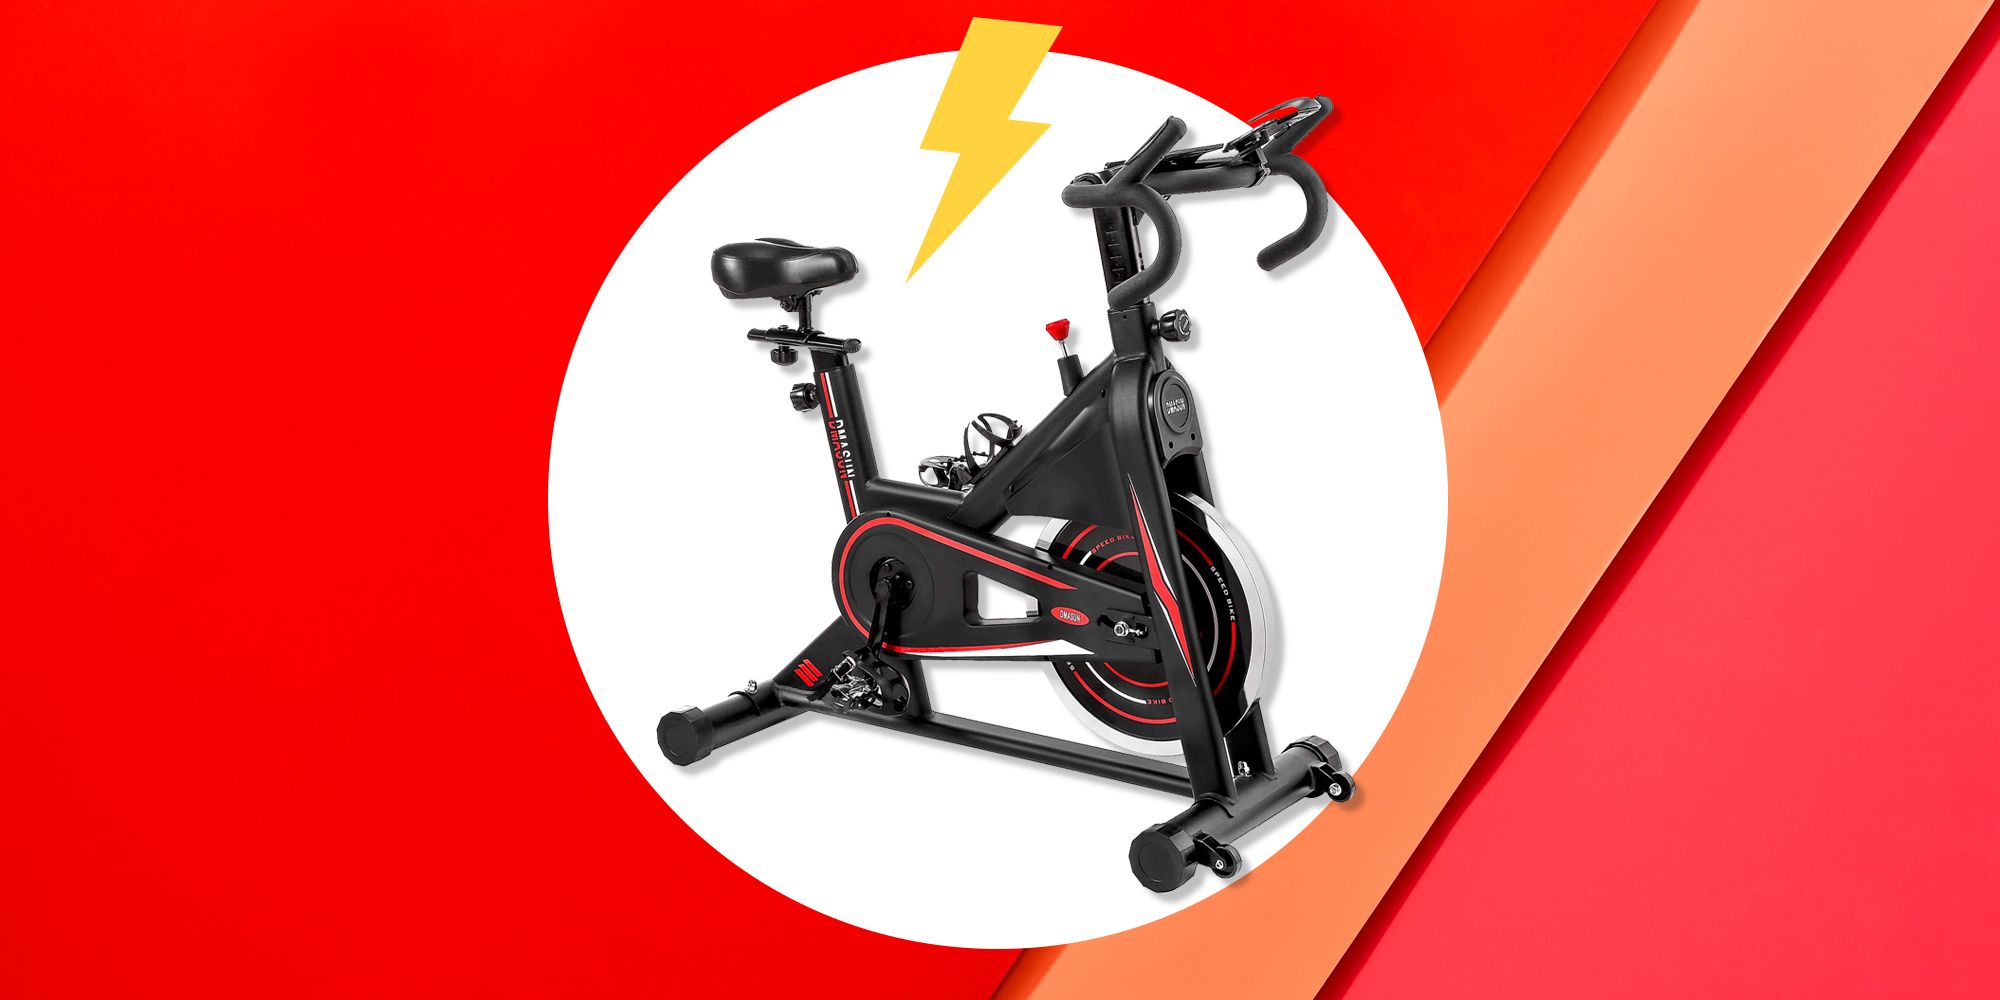 Bicycle Cycling Fitness Gym Exercise Stationary Bike Workout Home Indoor Use 